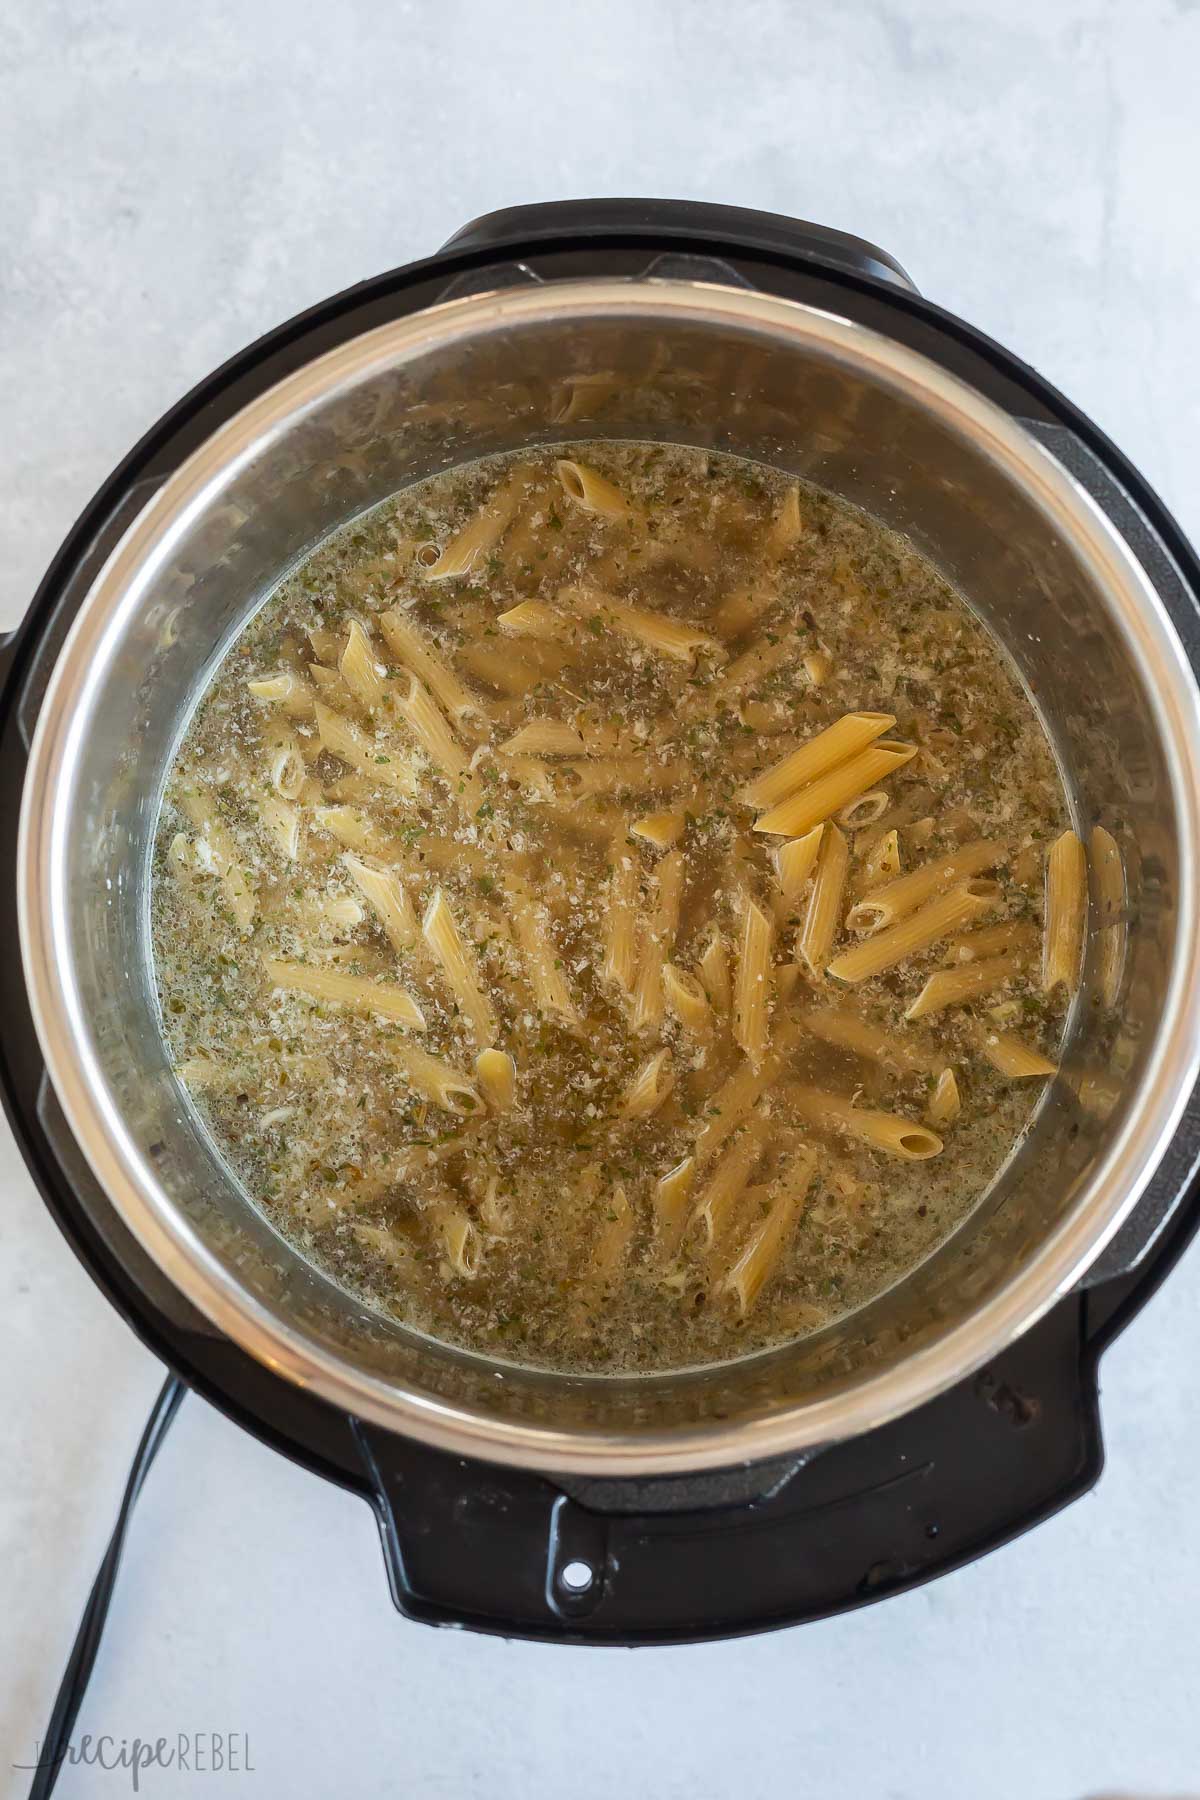 uncooked pasta added to broth in instant pot.